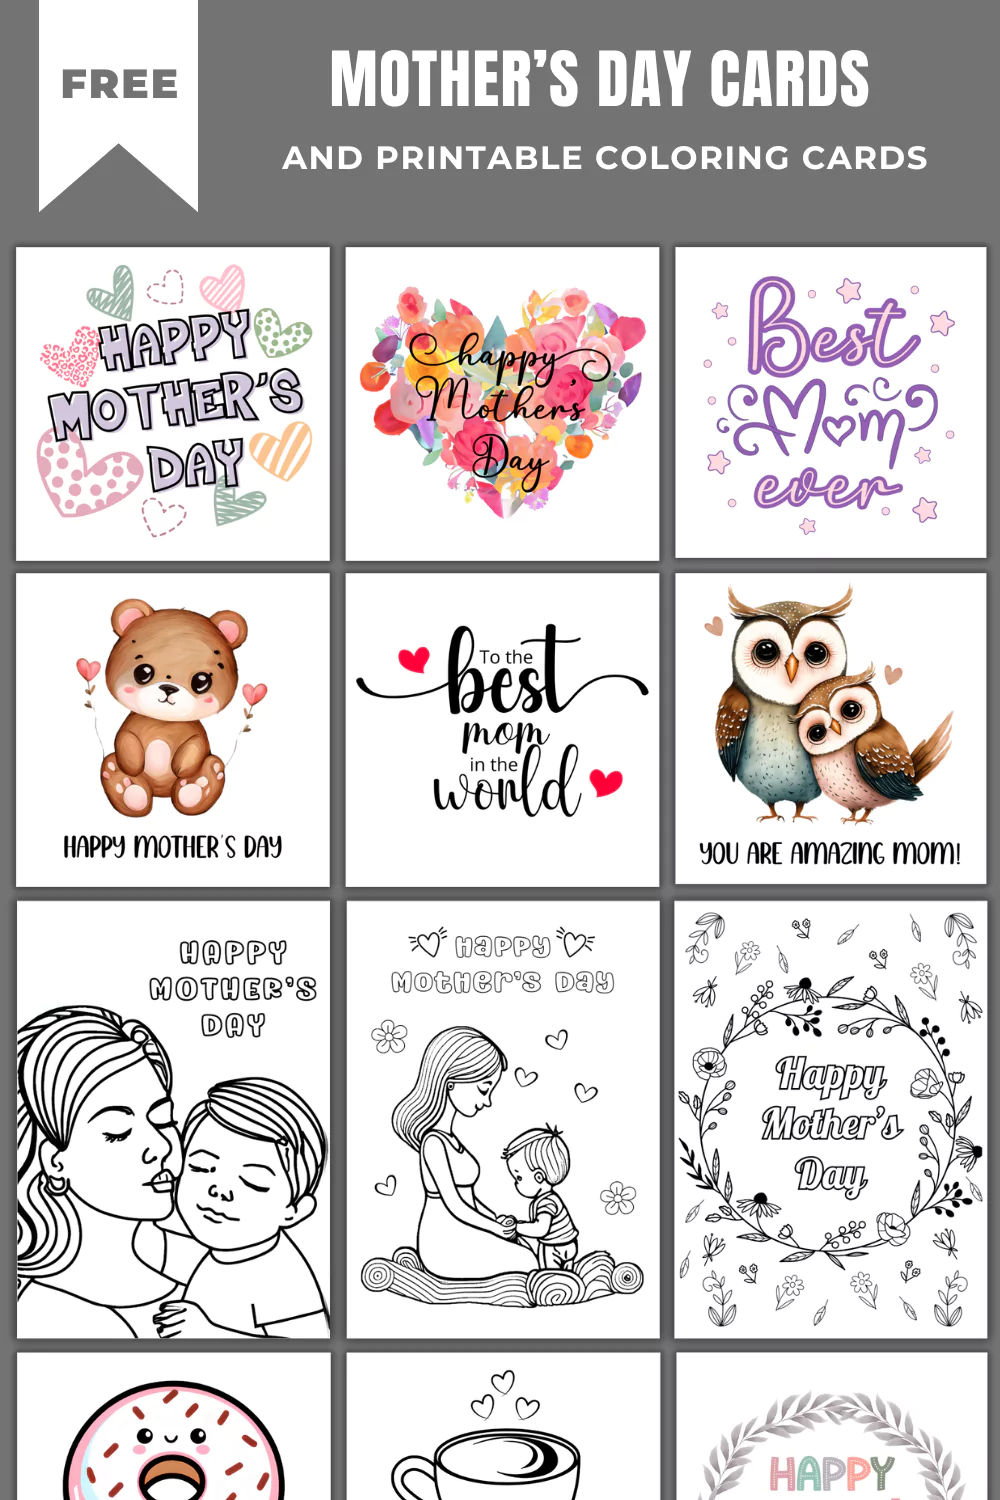 Click here for Mother's Day Cards